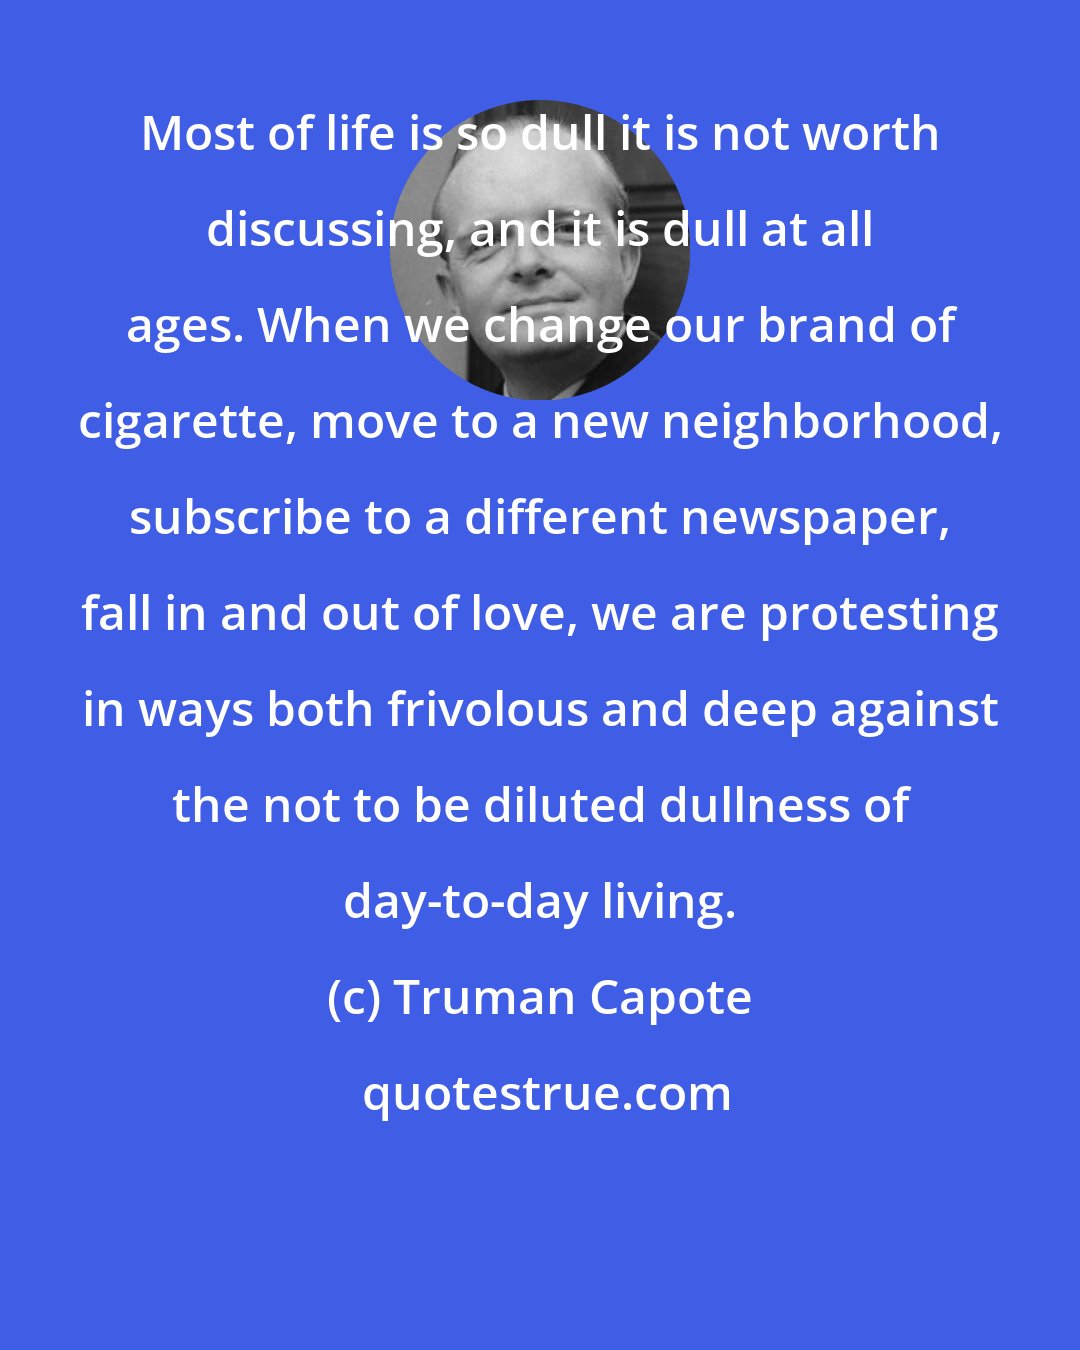 Truman Capote: Most of life is so dull it is not worth discussing, and it is dull at all ages. When we change our brand of cigarette, move to a new neighborhood, subscribe to a different newspaper, fall in and out of love, we are protesting in ways both frivolous and deep against the not to be diluted dullness of day-to-day living.